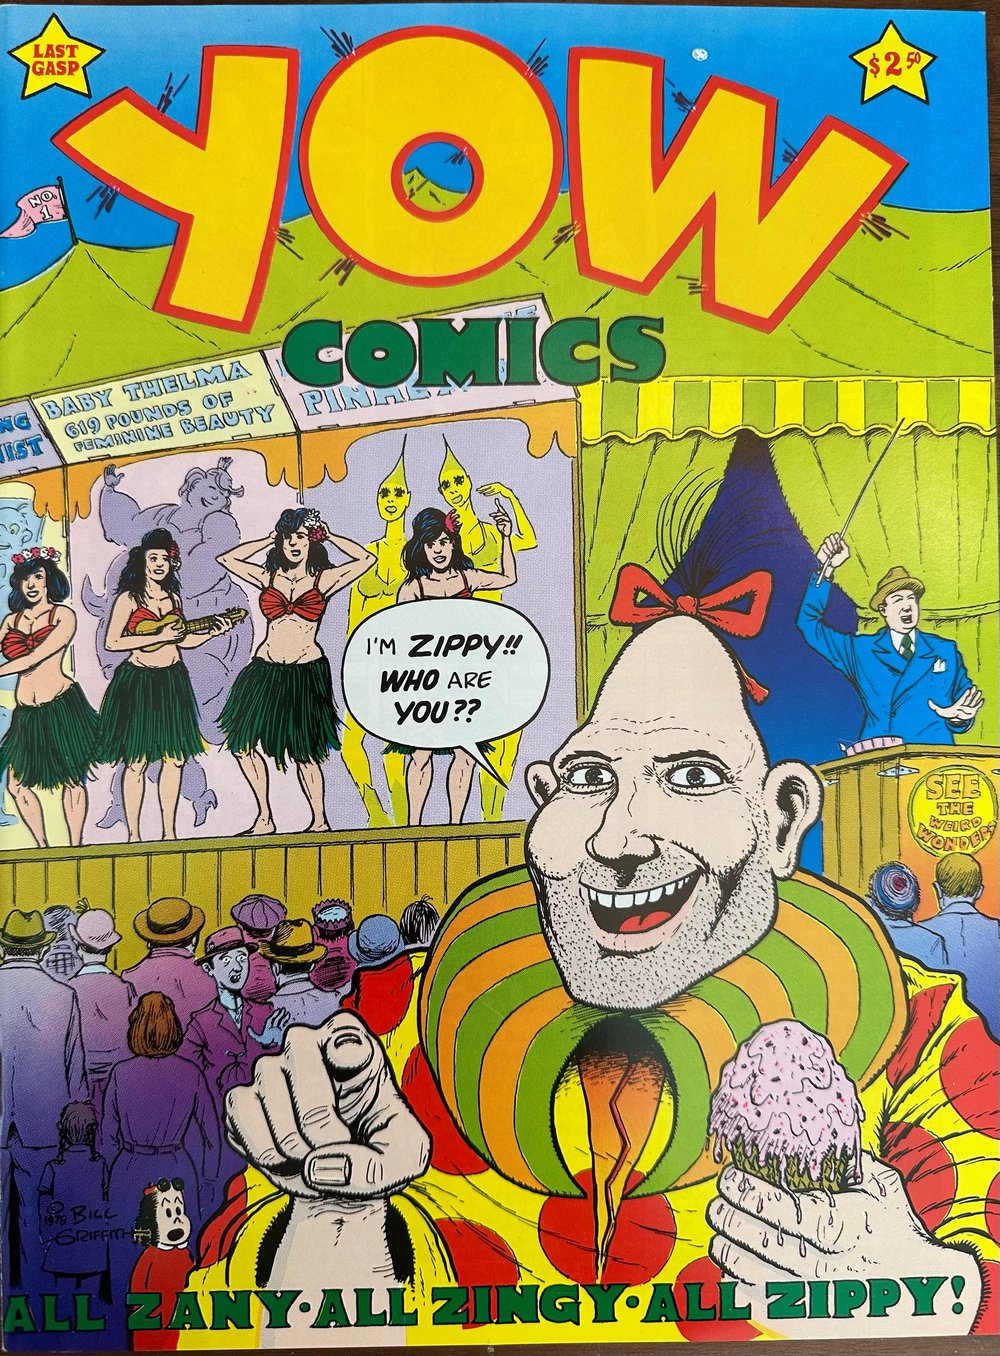 YOW Comics - Starring Zippy, by Bill Griffith